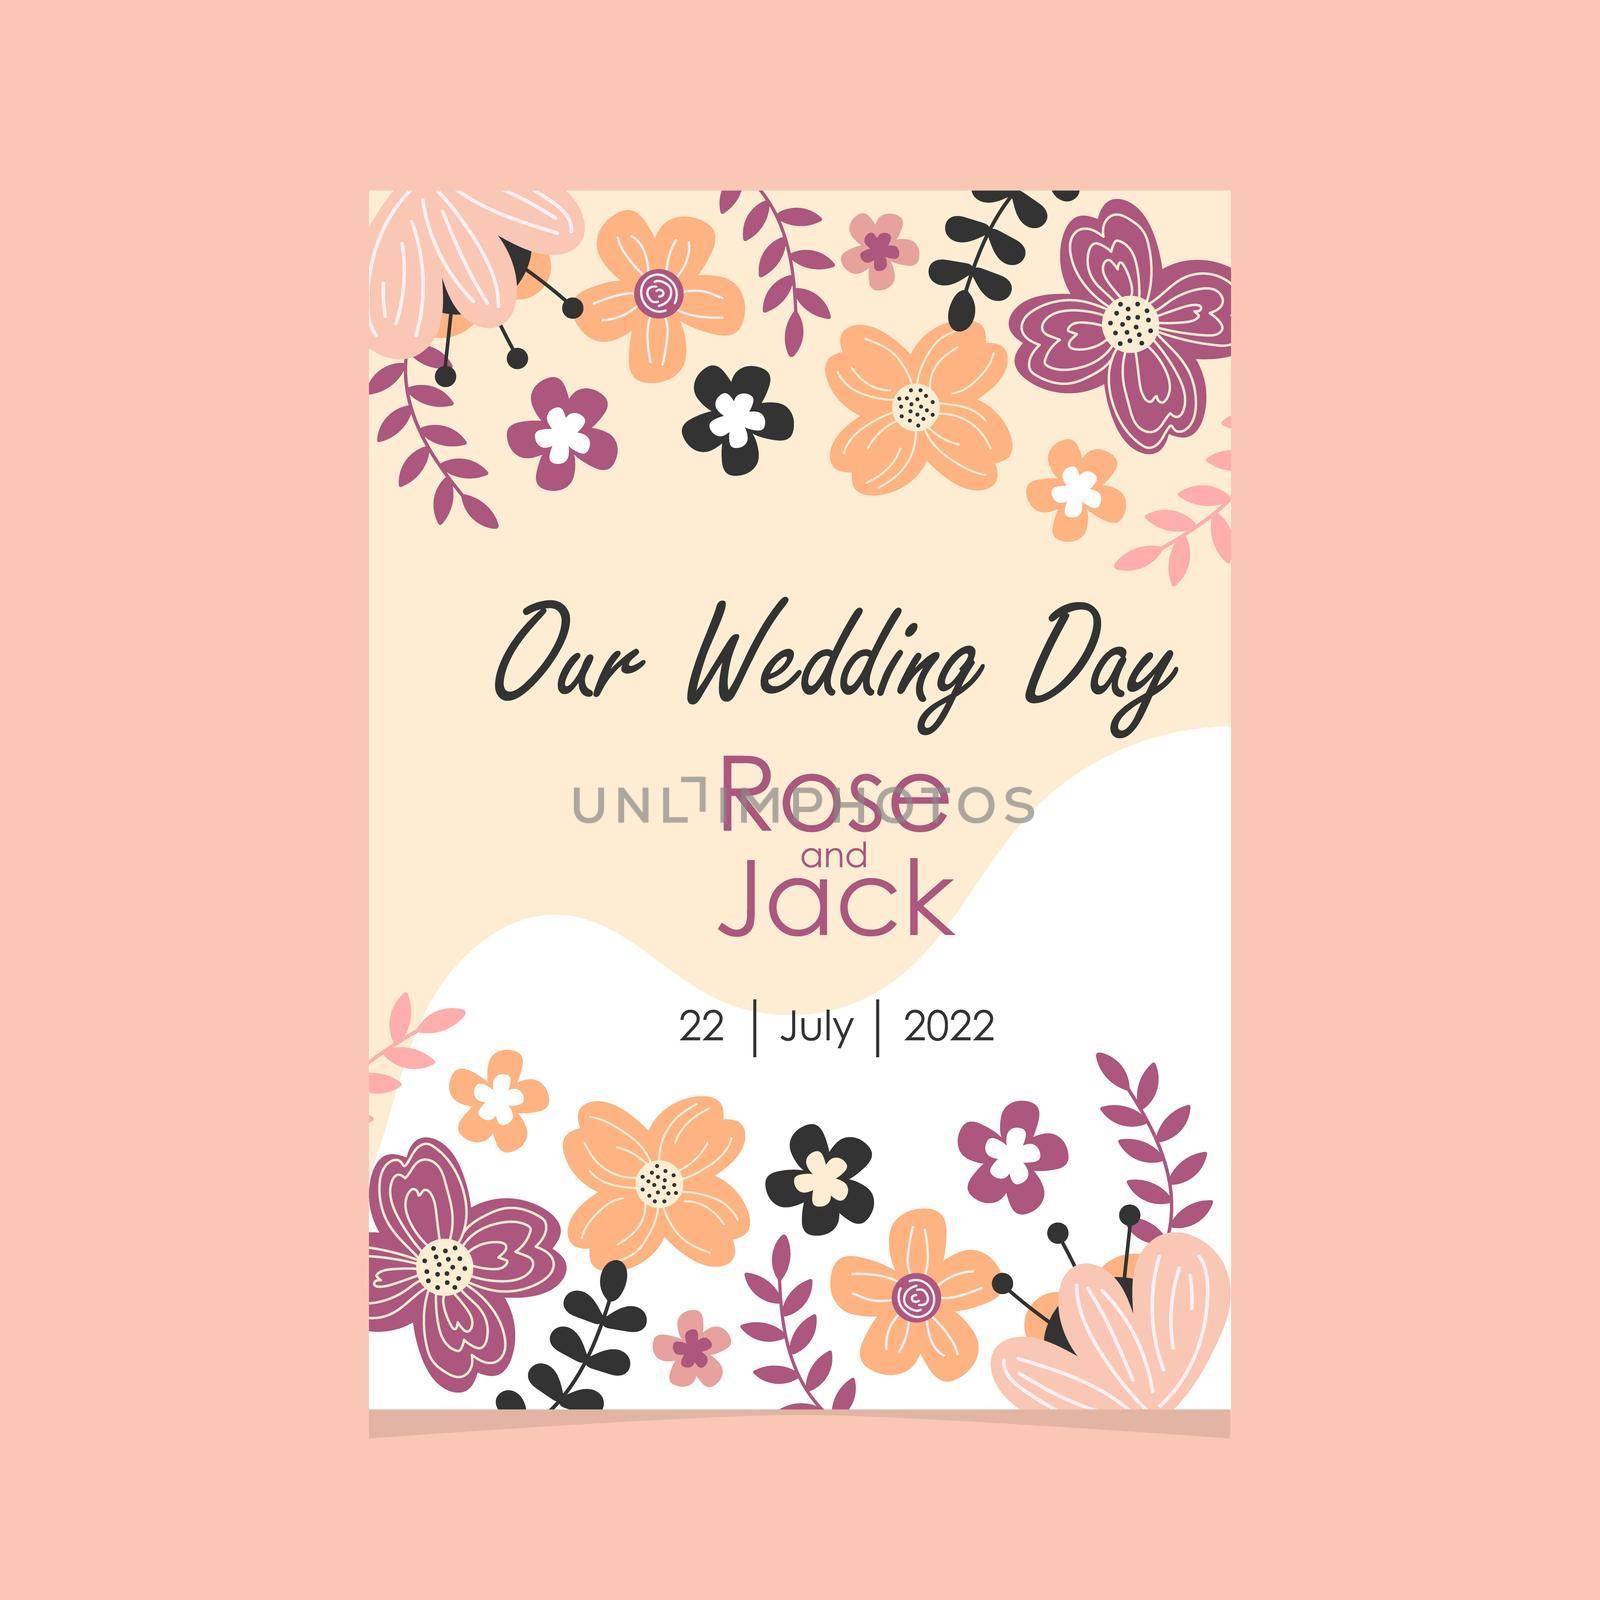 Wedding invitation template in pastel colors. Hand drawn flowers and natural elements. Our wedding day card